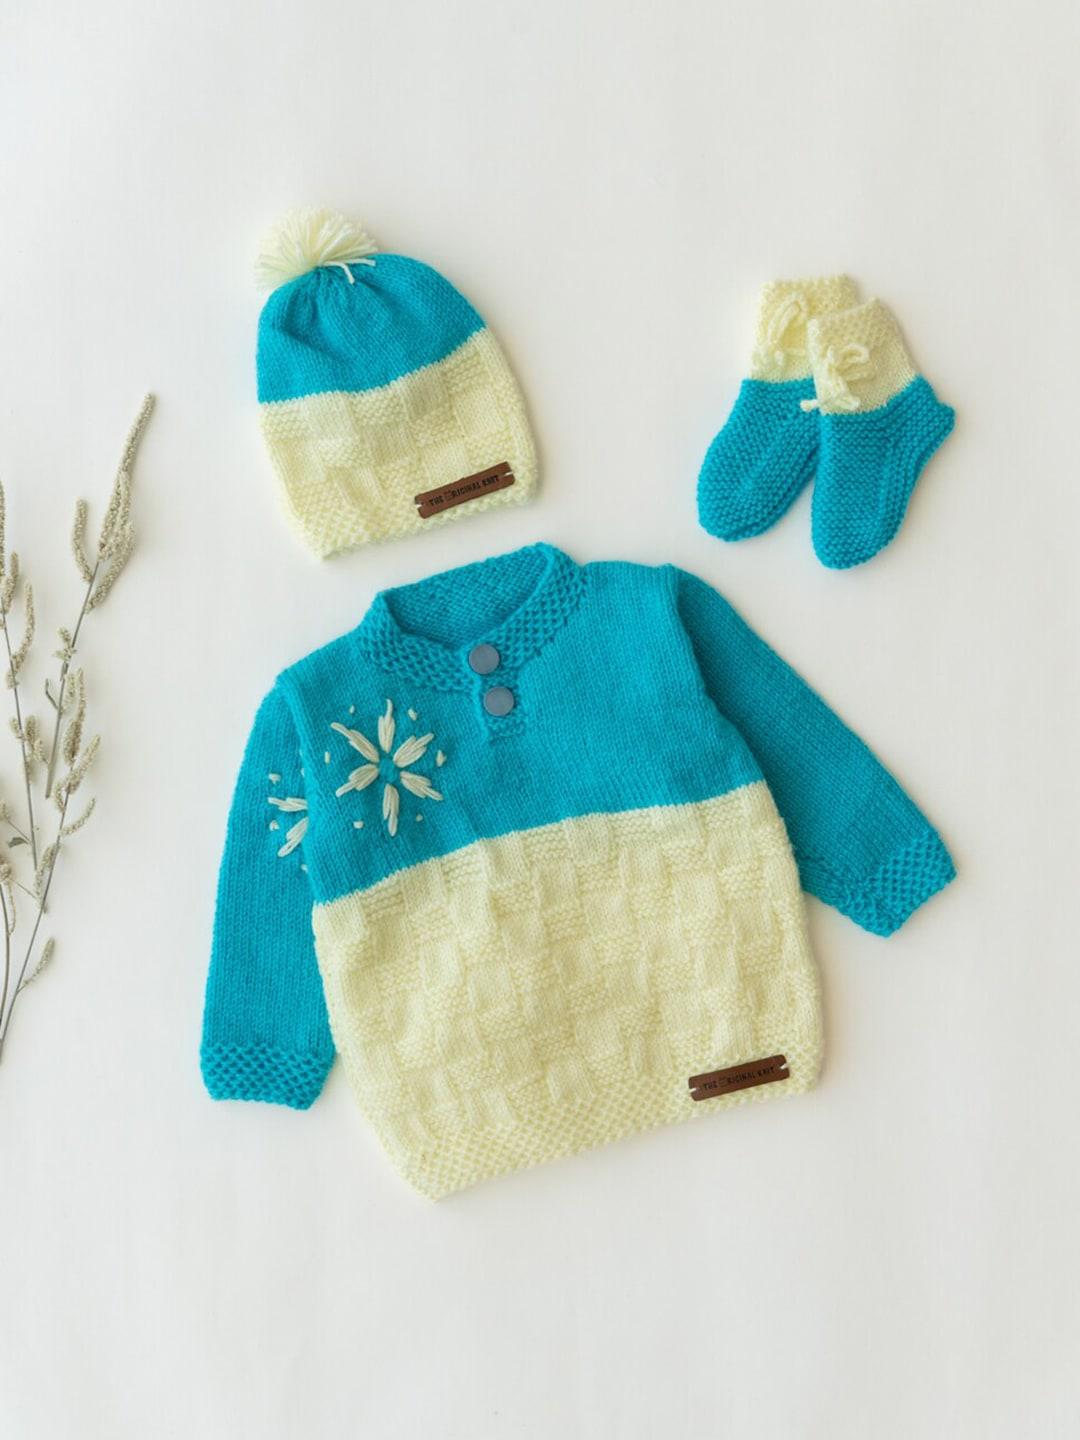 The Original Knit Infant Kids Embroidered Colourblocked Acrylic Pullover Sweater Set